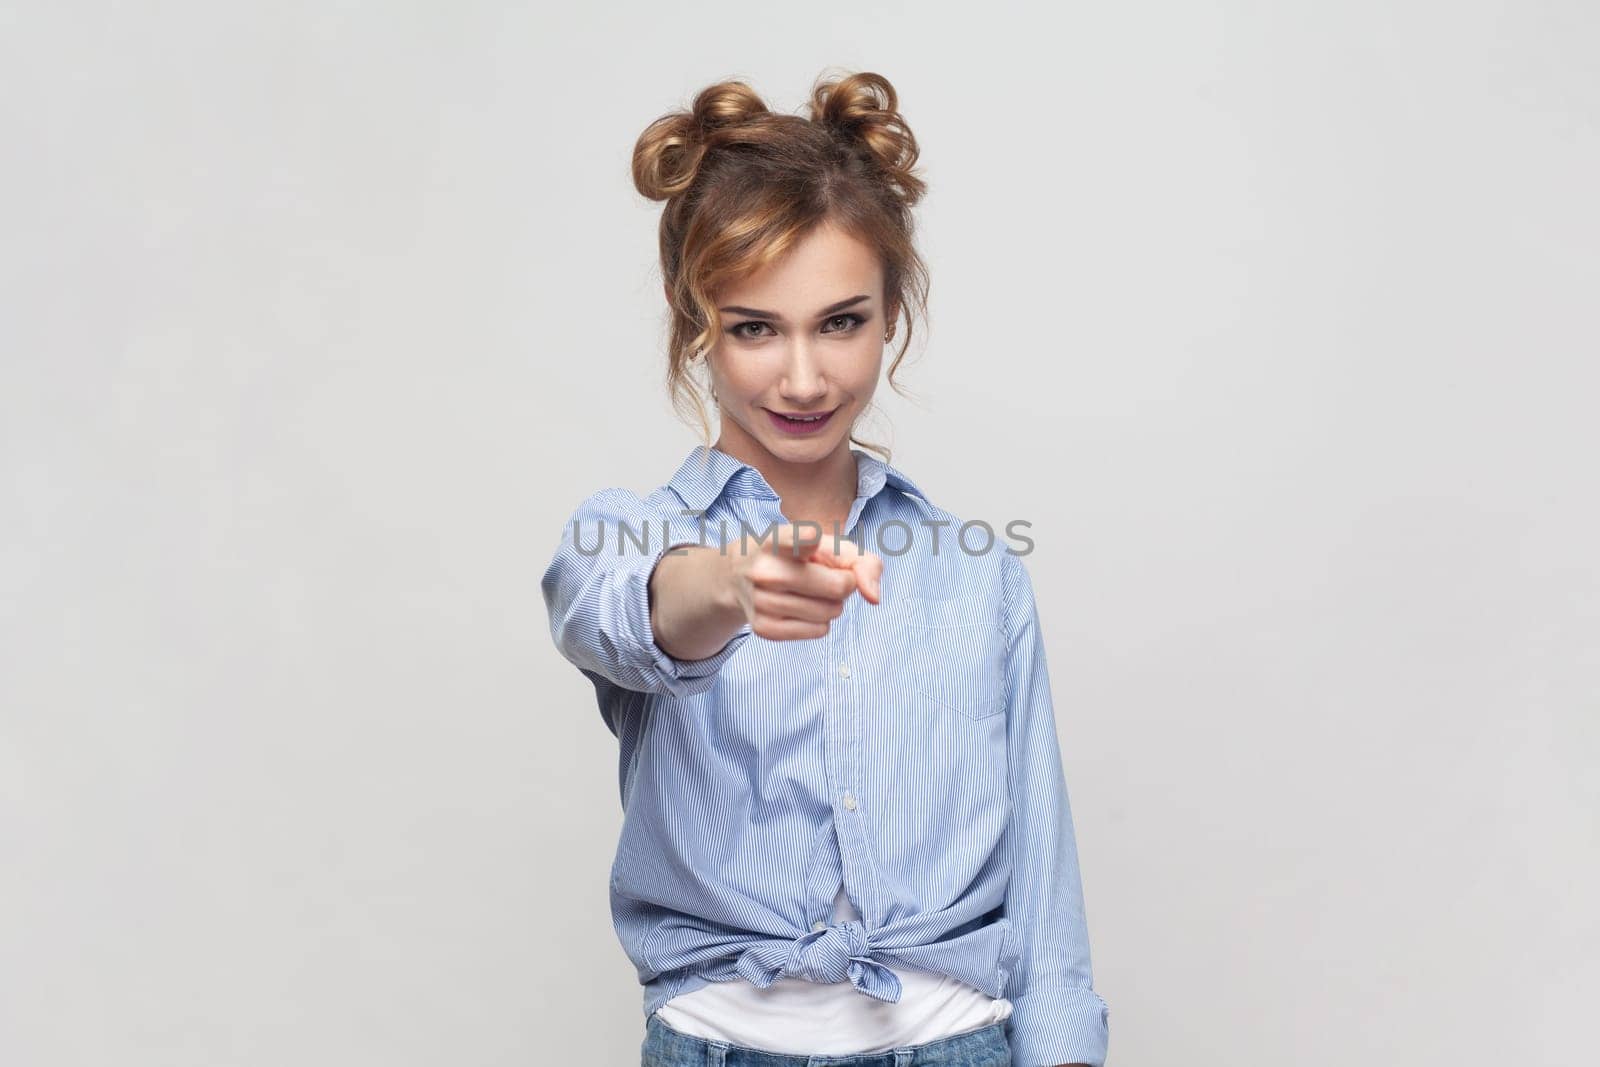 Portrait of joyous pretty blonde woman pointing finger to camera, expresses choice, smiling broadly, saying you are chosen, wearing blue shirt. Indoor studio shot isolated on gray background.